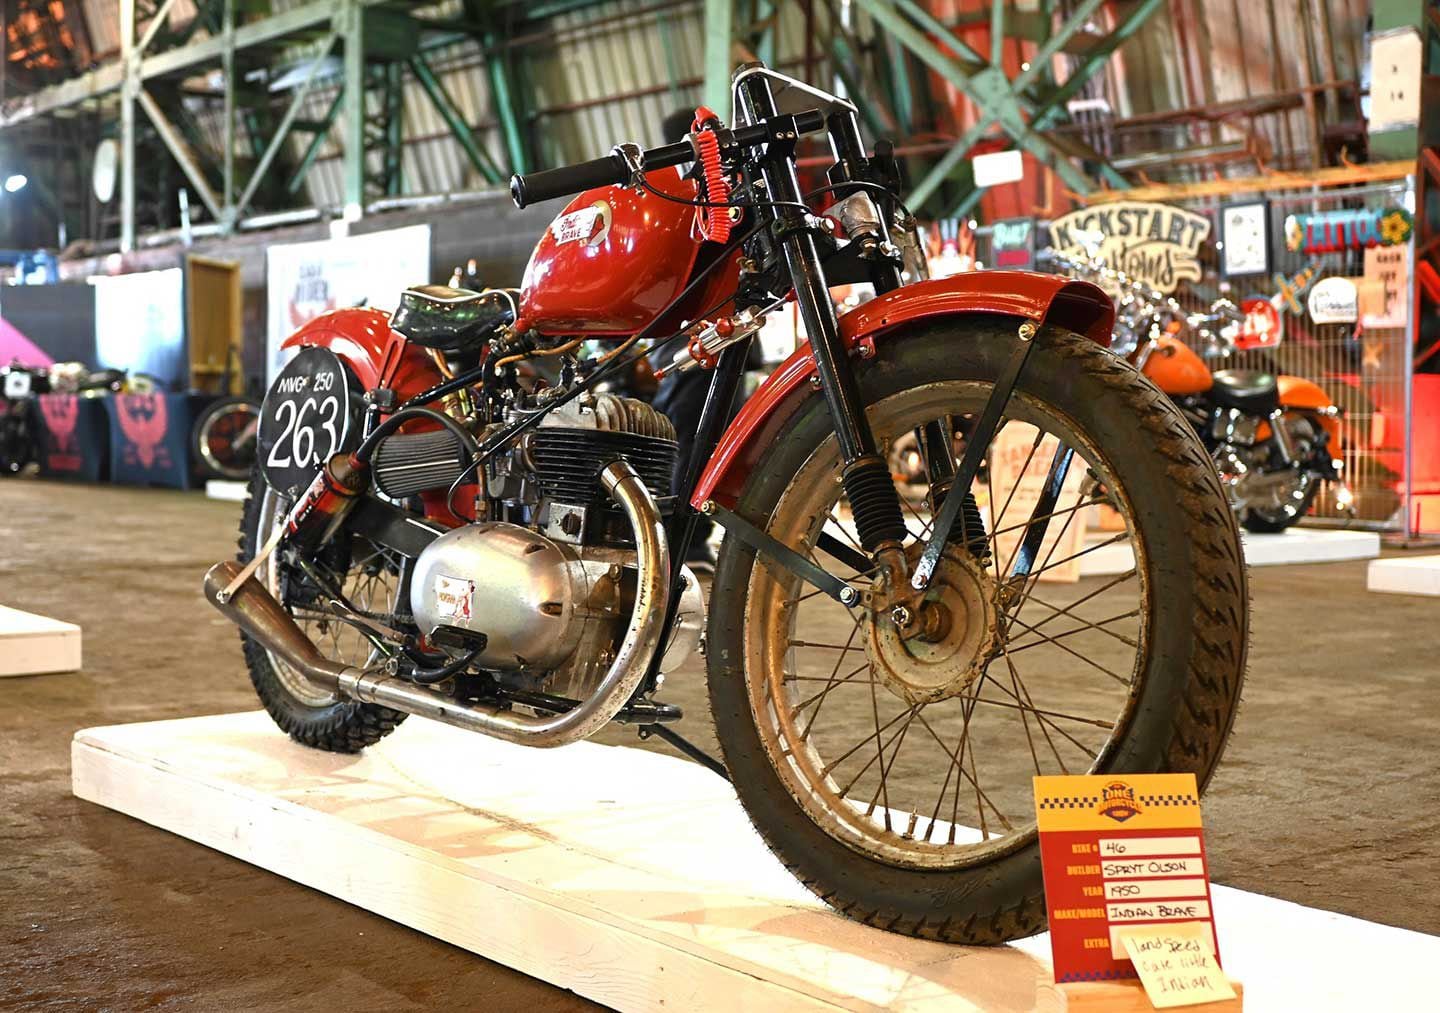 An enigma in the big-bore world of Indian, the single-cylinder side-valve 250cc Brave was produced in limited numbers by Brockhouse Engineering in England and never caught on in the US. Still cool to spot this bike at the show, brought in by Spryt Olson.